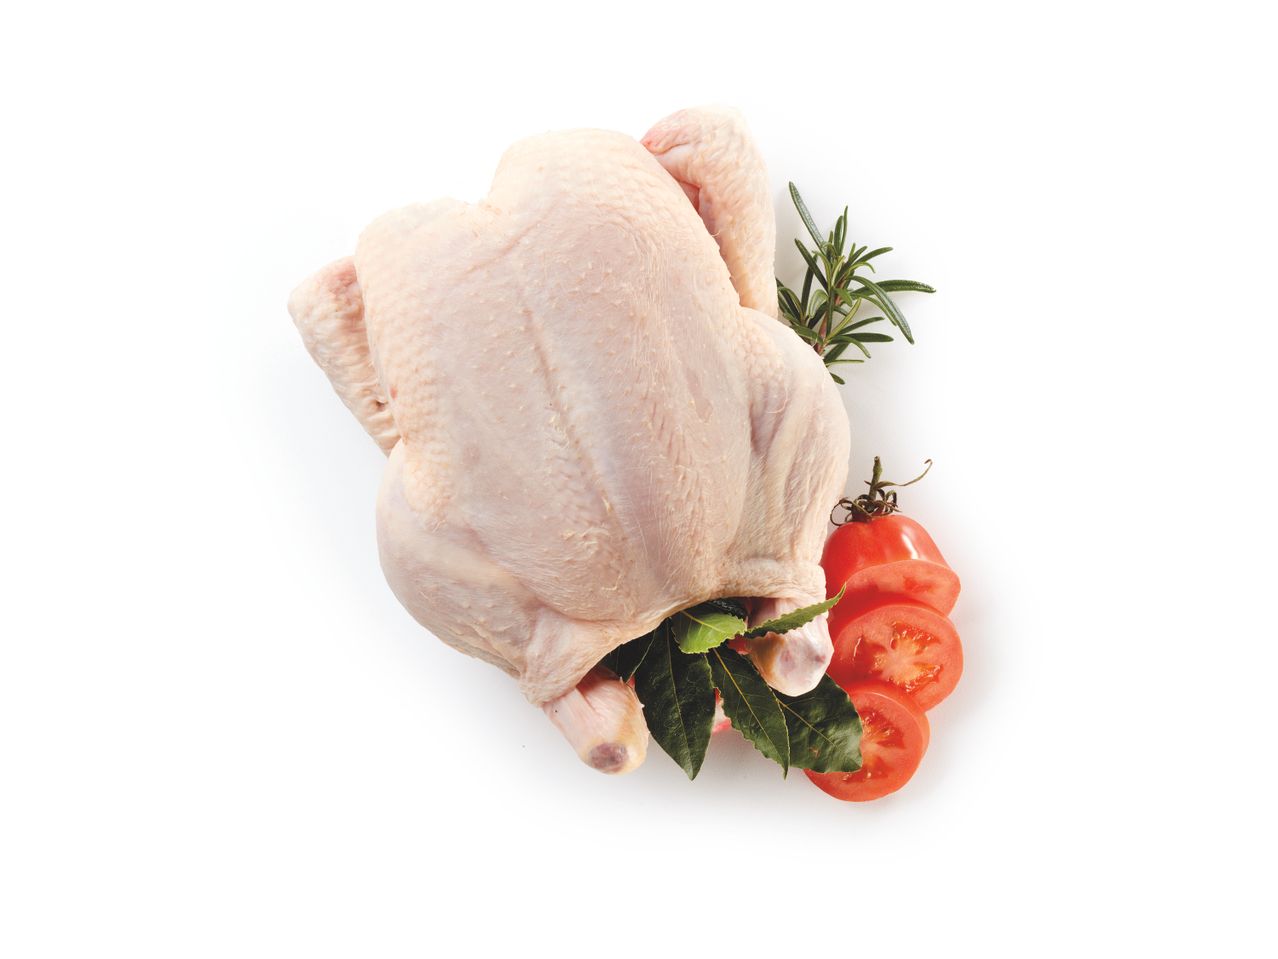 Go to full screen view: Whole Chicken - Image 1